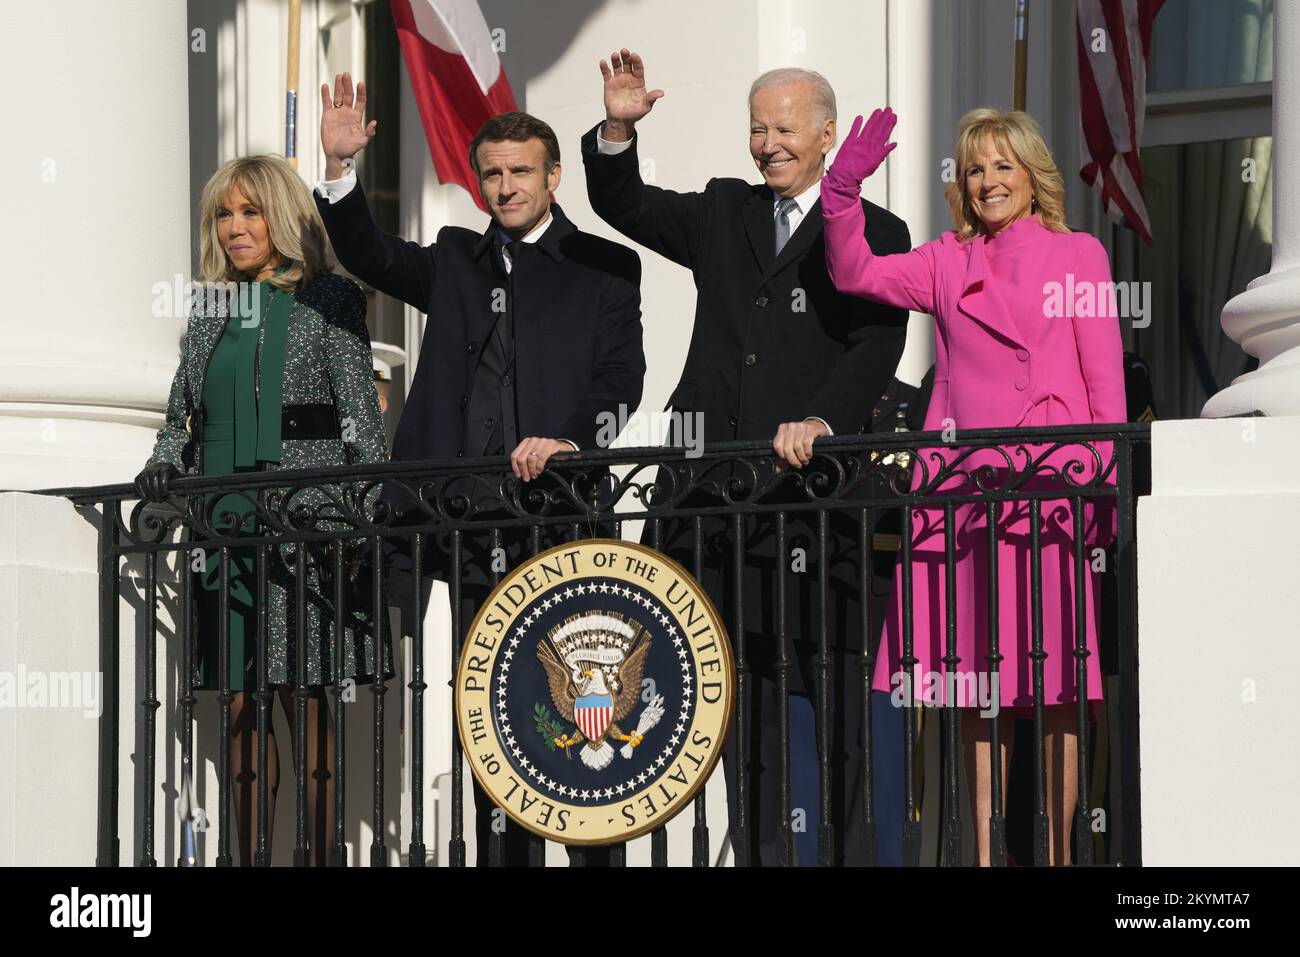 Washington, DC, December 1, 2022, United States President Joe Biden and first lady Dr. Jill Biden host a State Arrival ceremony honoring President Emmanuel Macron and Brigitte Macron of France on the South Lawn of the White House in Washington, DC on Thursday, December 1, 2022Credit: Chris Kleponis / Pool via CNP Credit: Abaca Press/Alamy Live News Stock Photo